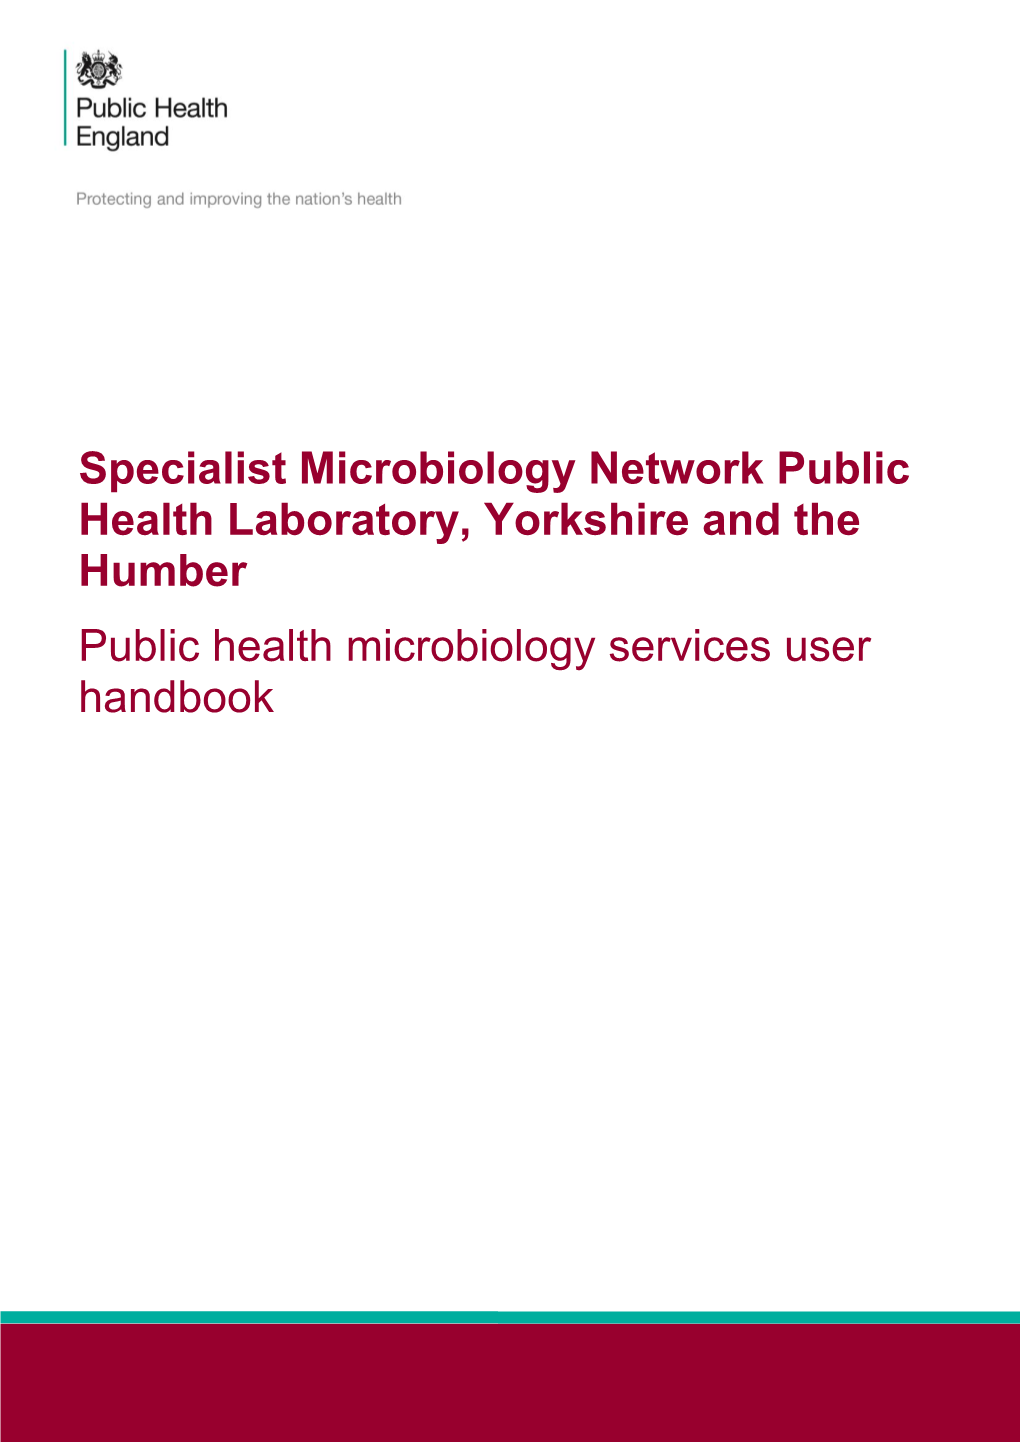 Specialist Microbiology Network Public Health Laboratory, Yorkshire & the Humber